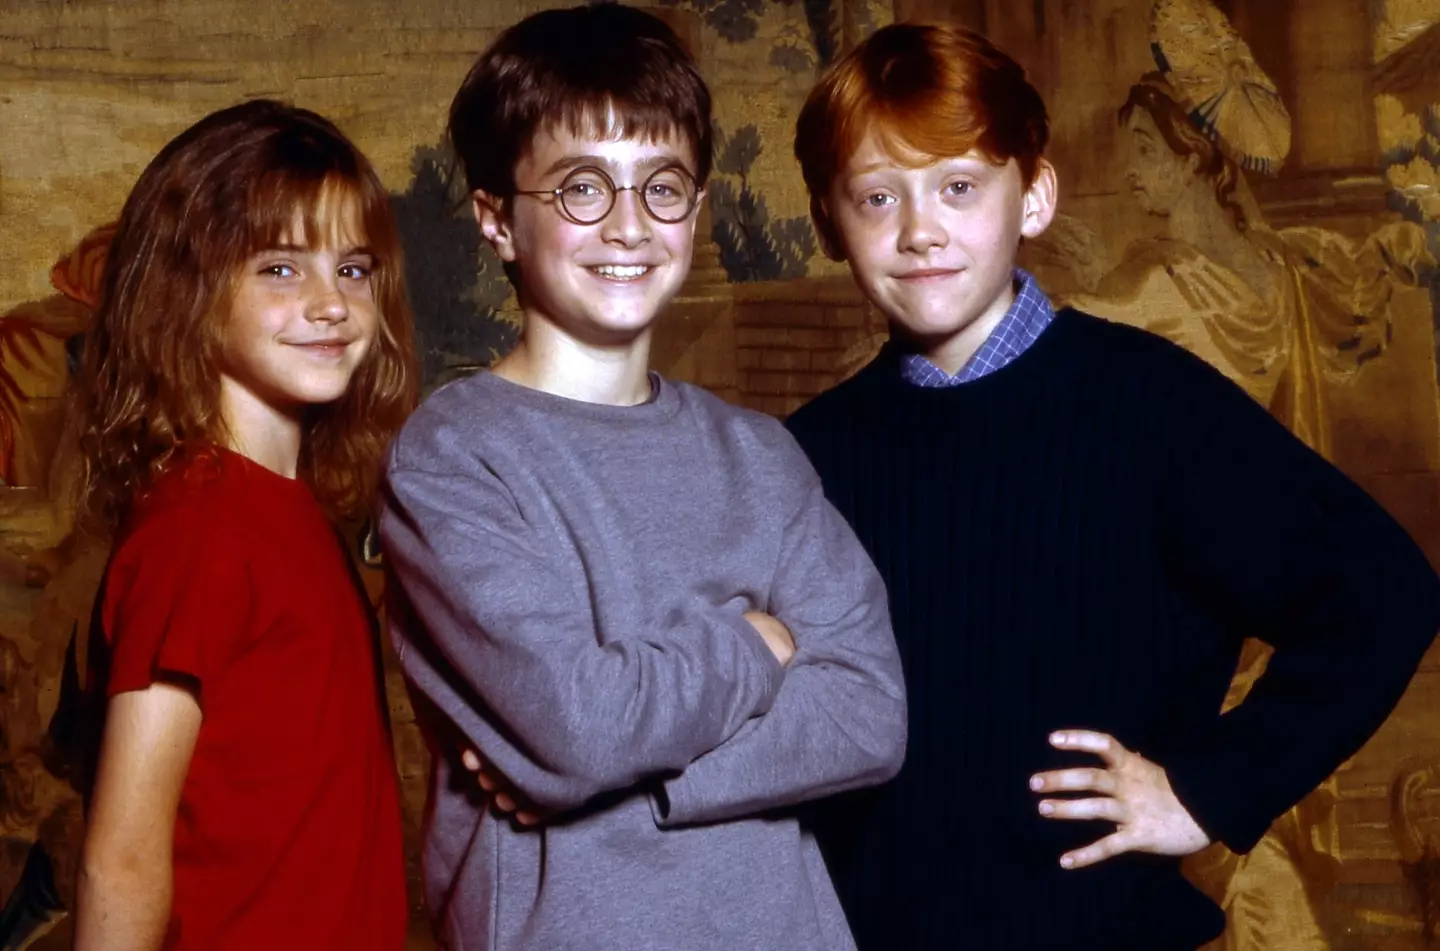 The trio were just kids when they started the films.